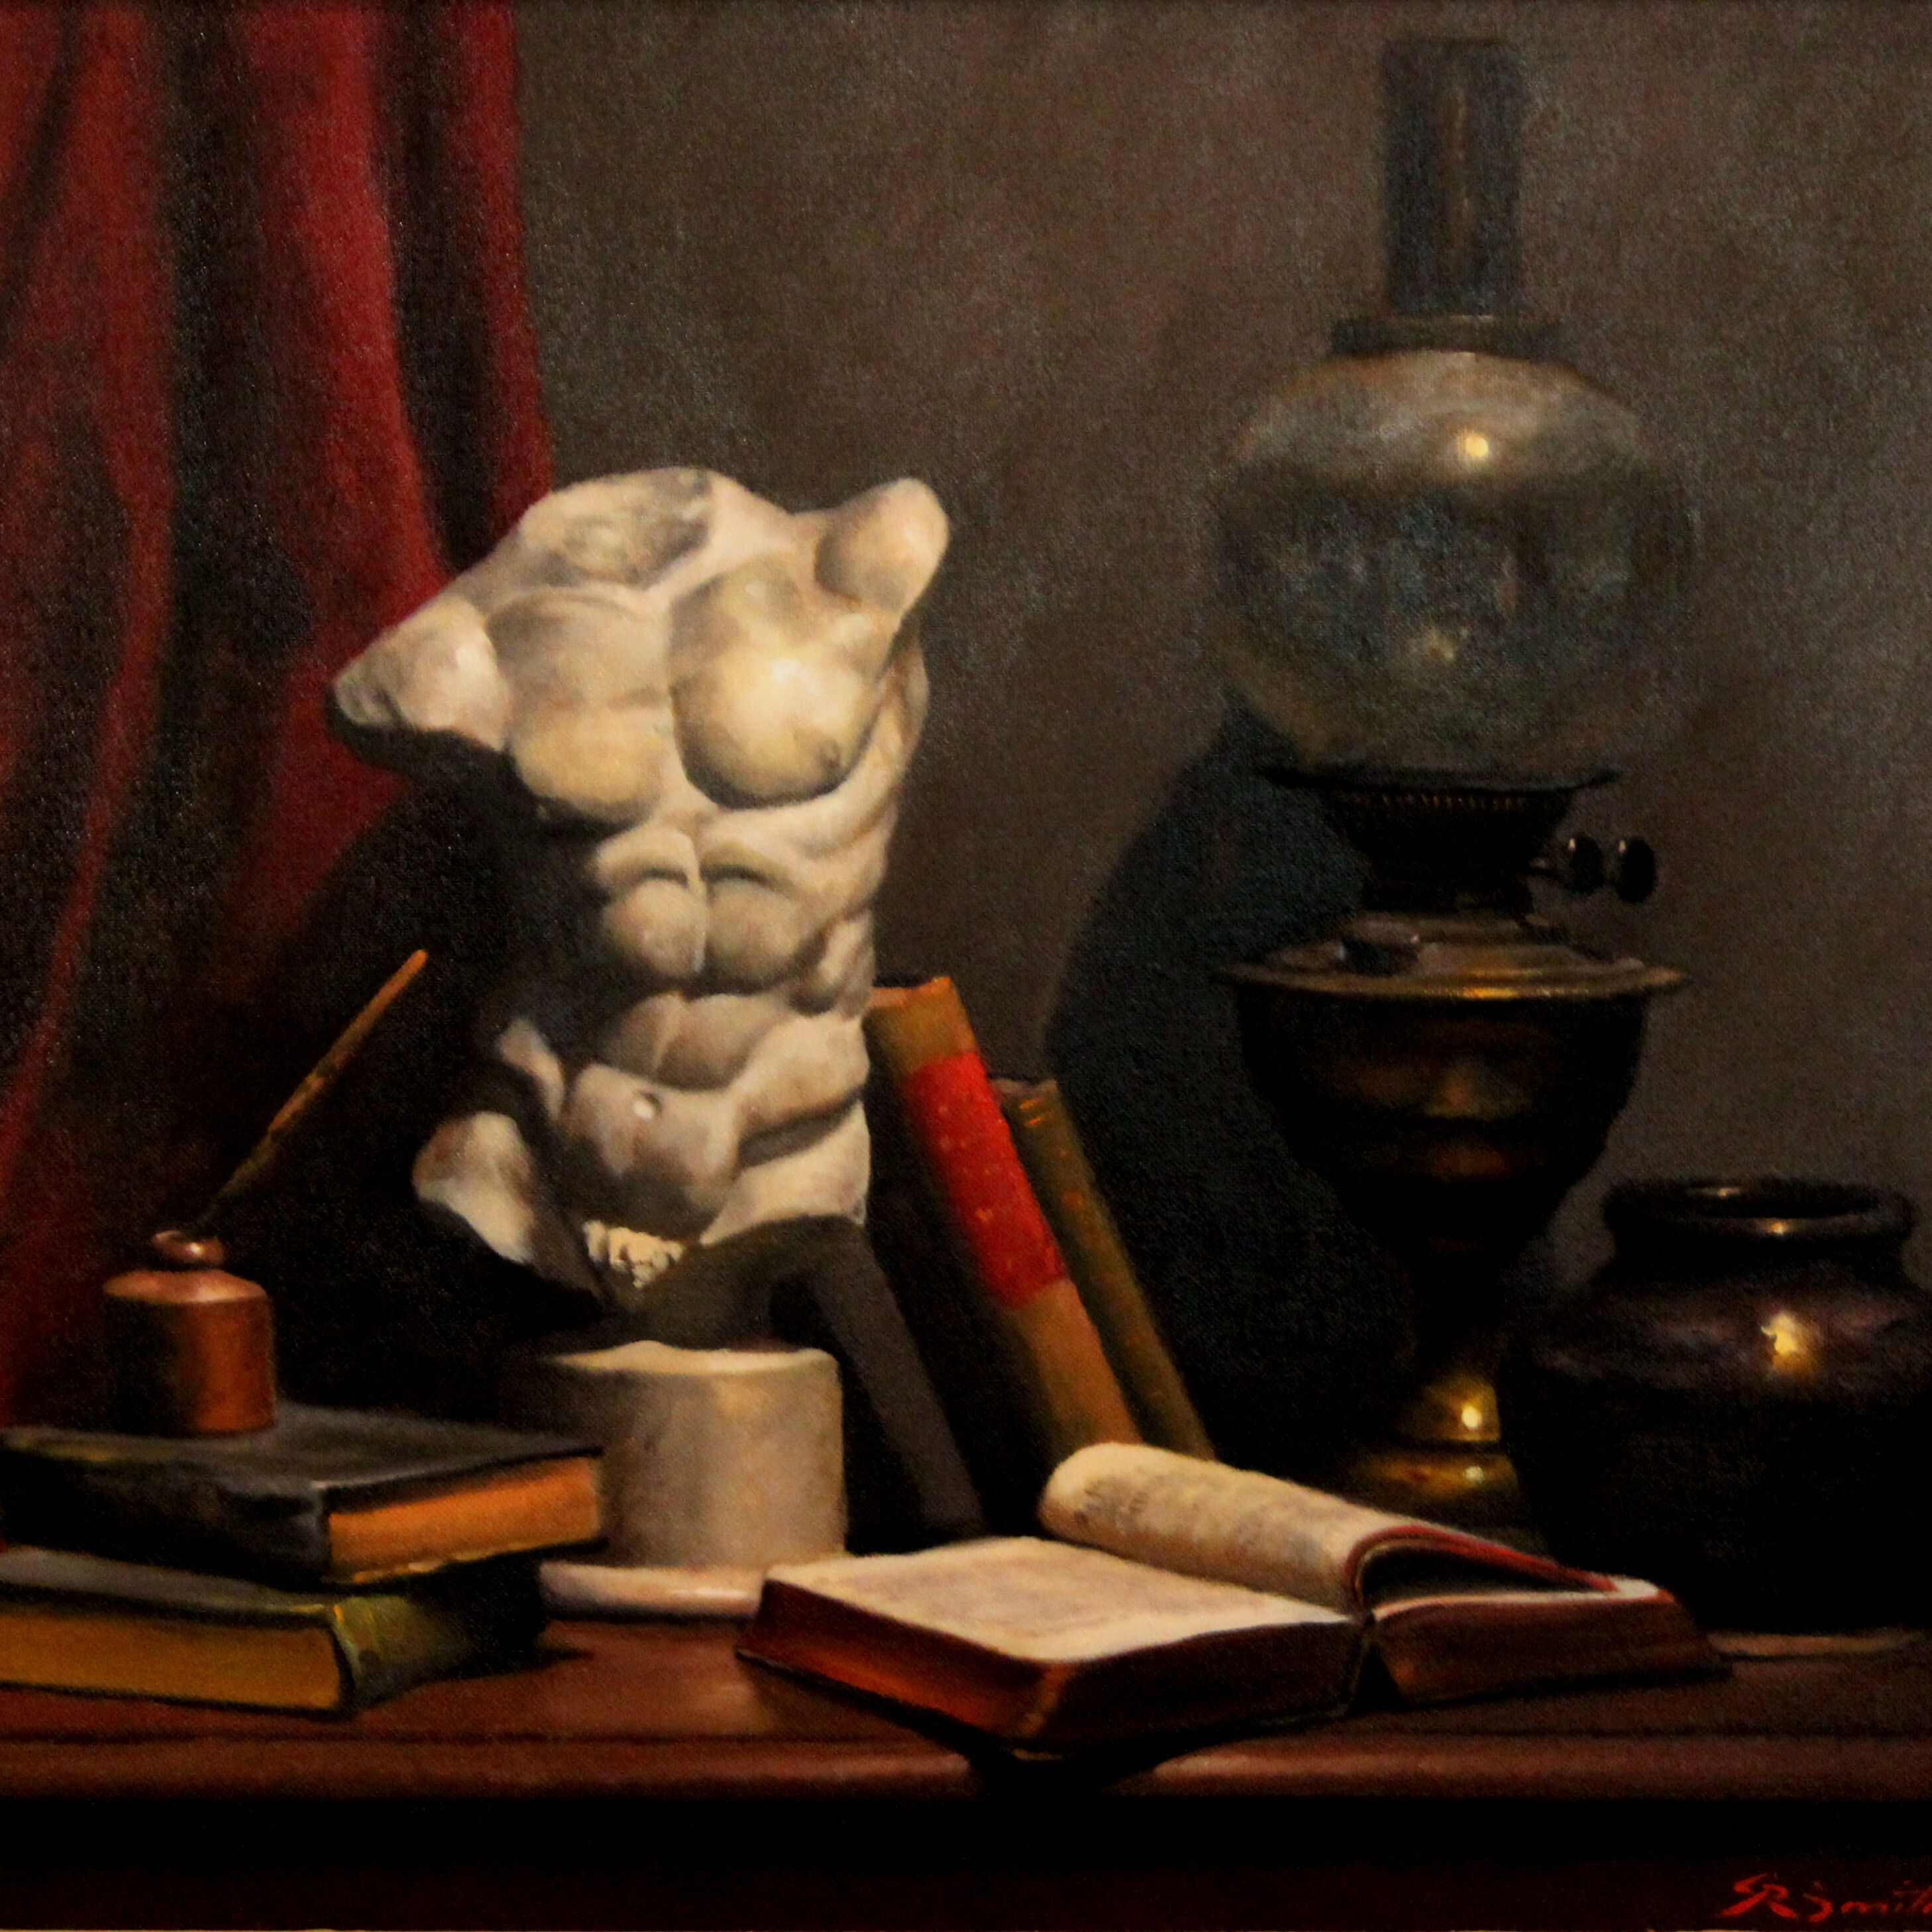 077_Still Life With Torso_Gregory R Smith